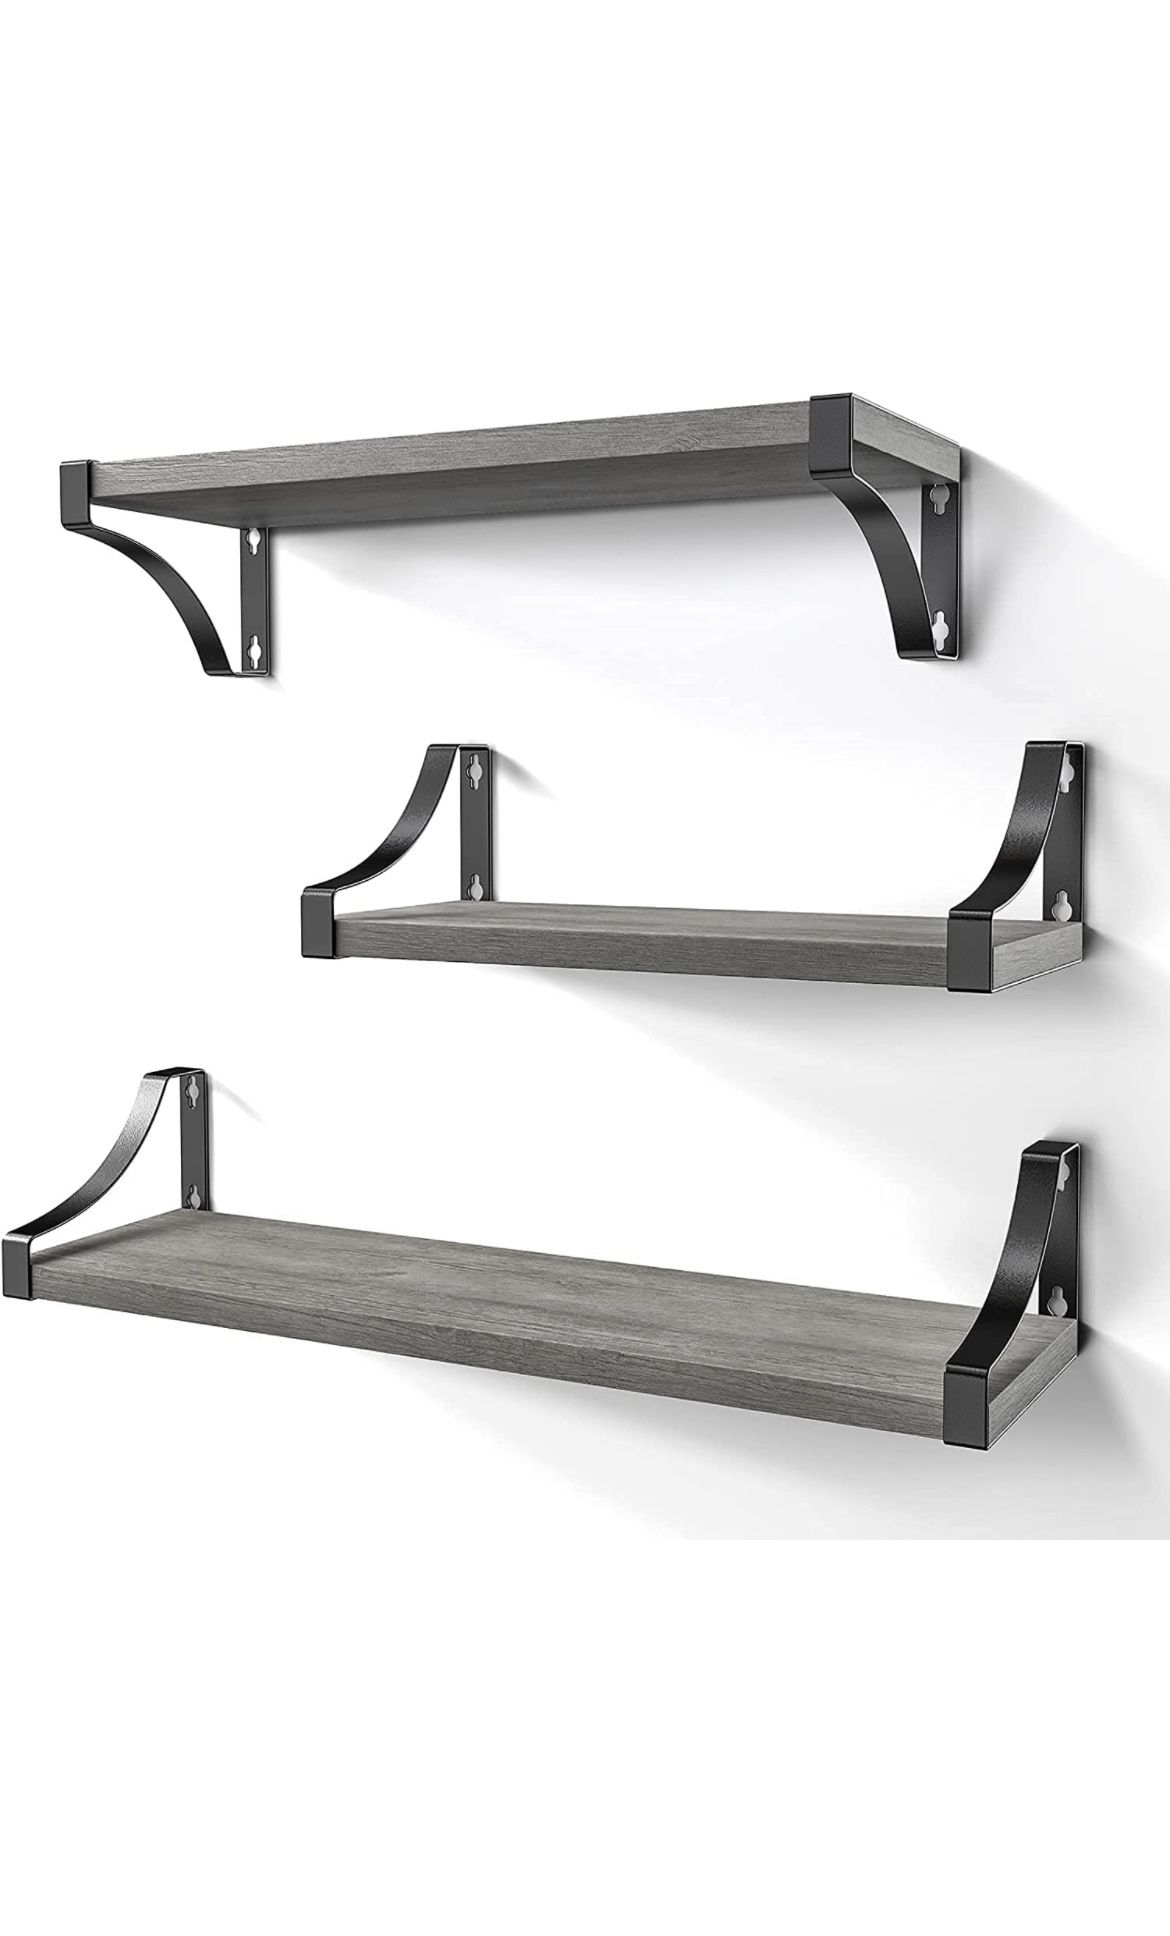 Heavily Discounted Floating Shelves Wholesale 7 Different Variations .